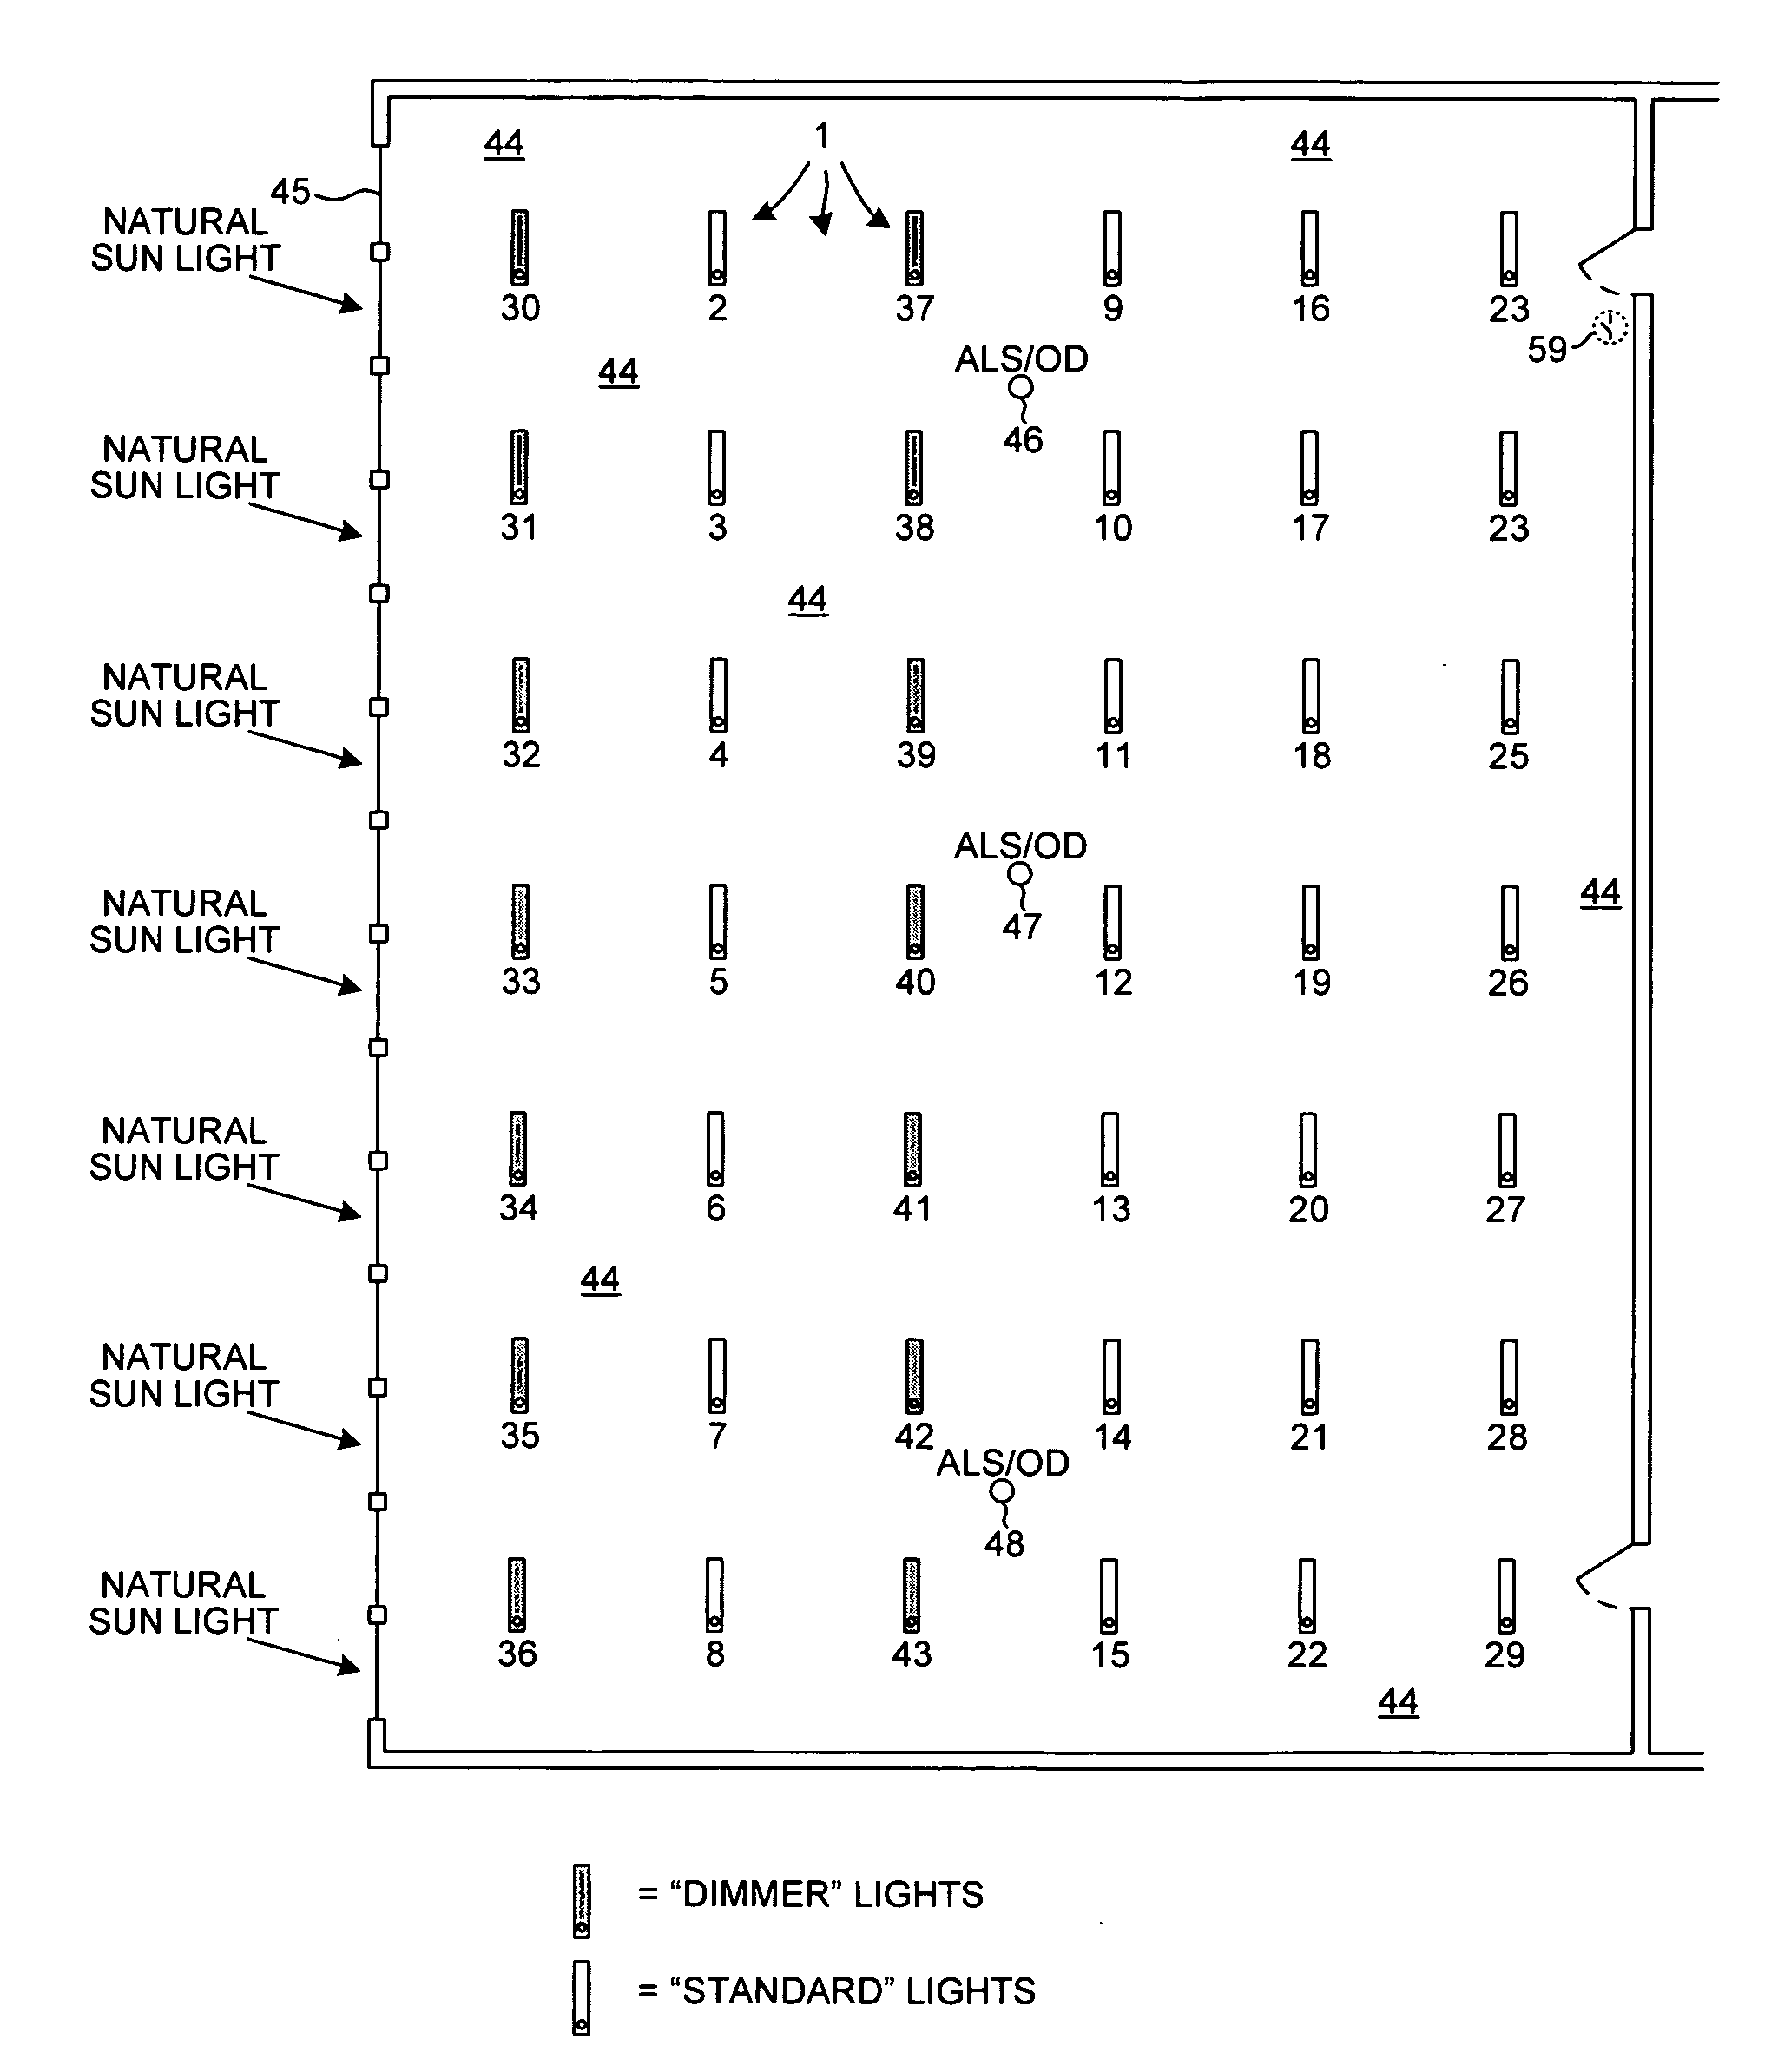 Ambient light sensor auto-calibration in a lighting control system